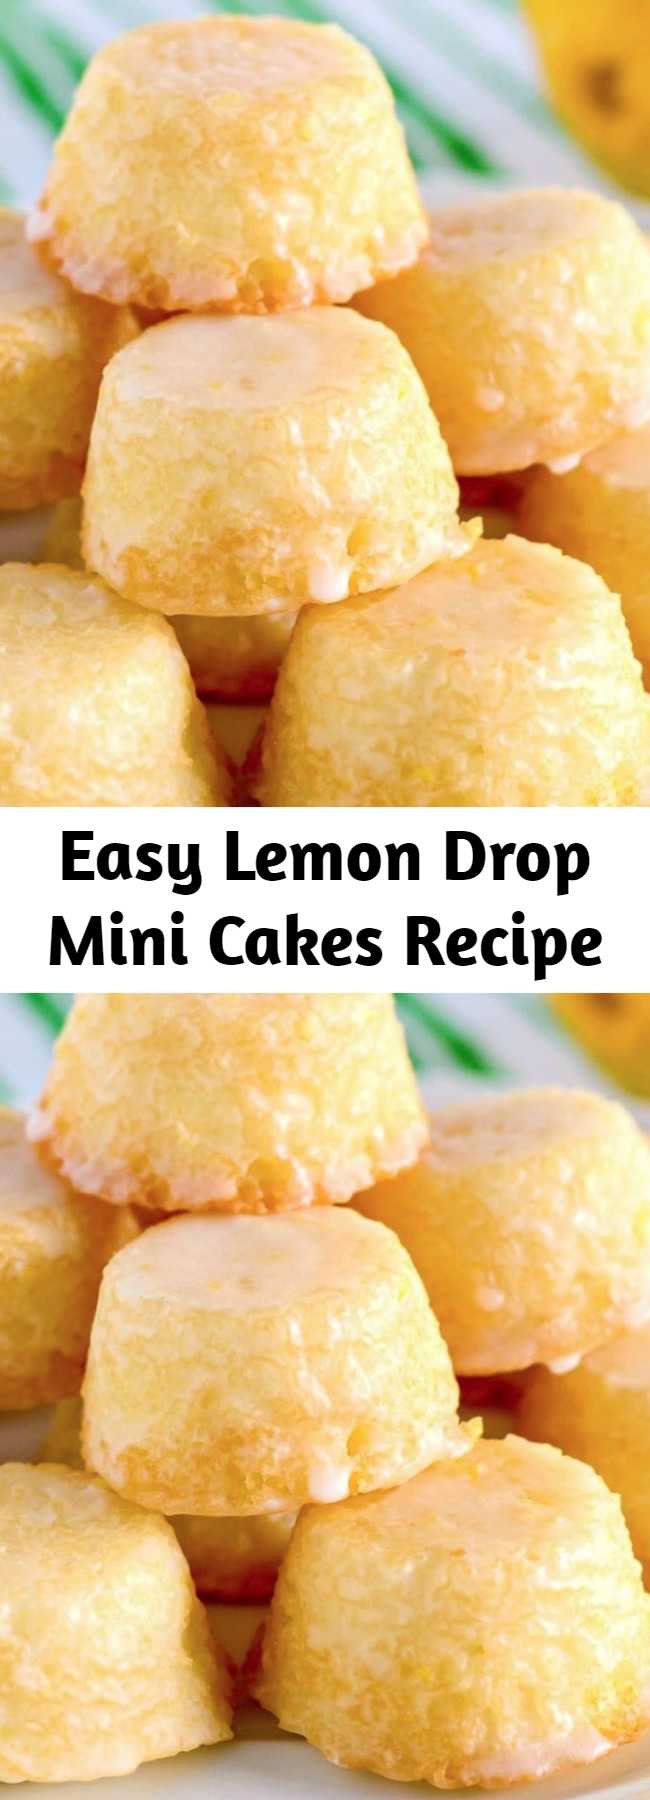 Easy Lemon Drop Mini Cakes Recipe - These mini Lemon Drops are a perfect treat for lemon fans. Tiny lemon cakes are drenched in a mouthwatering lemon glaze making them delicious and addicting.